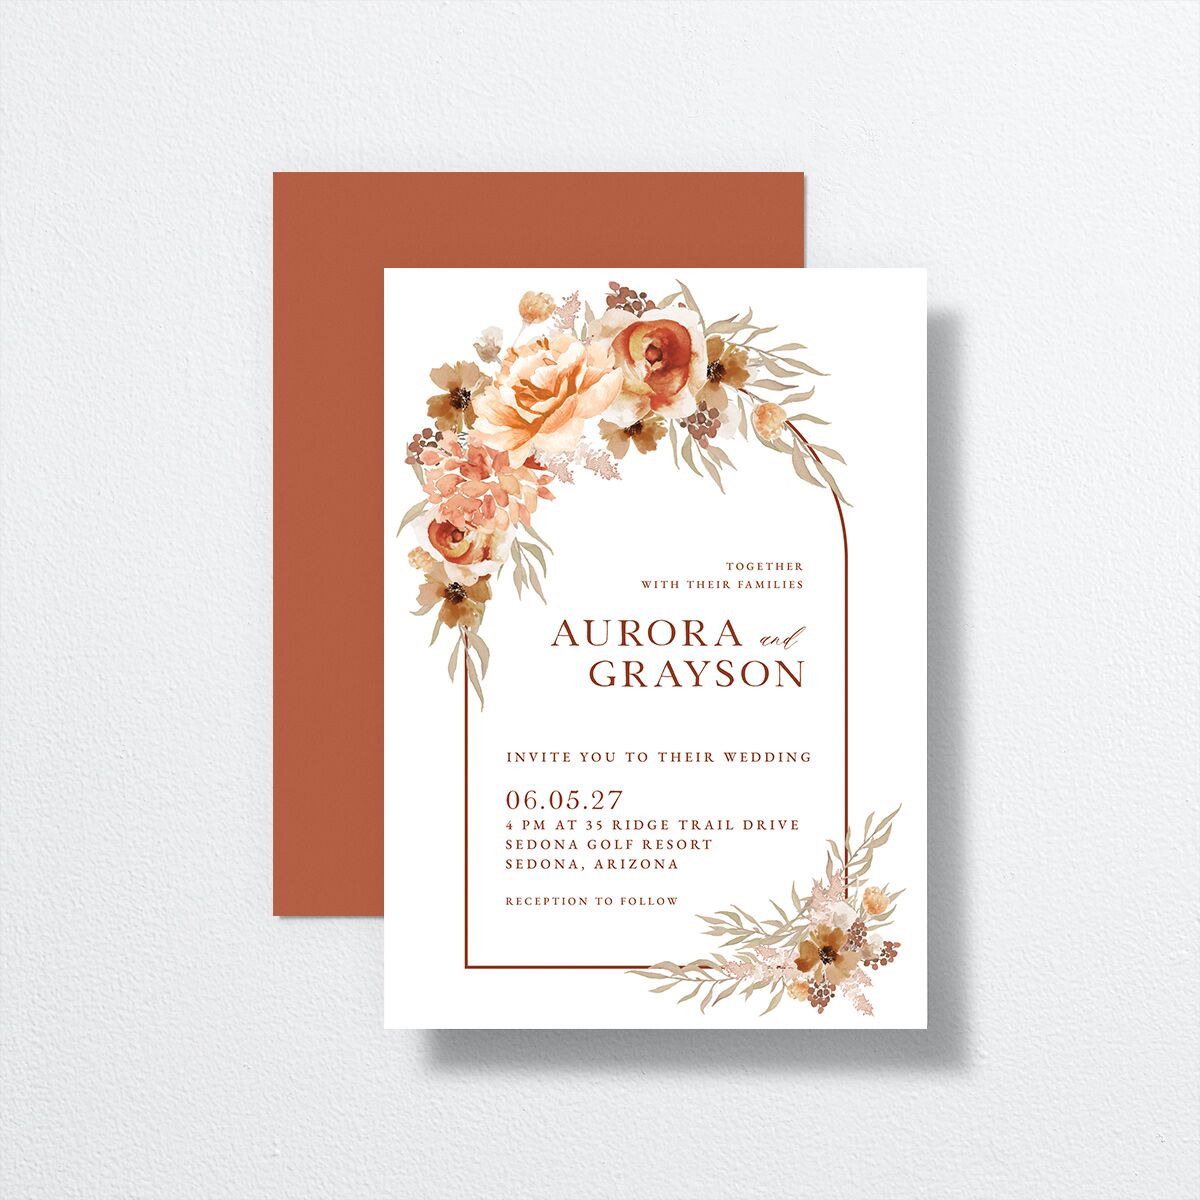 Bohemian Arch Wedding Invitations front-and-back